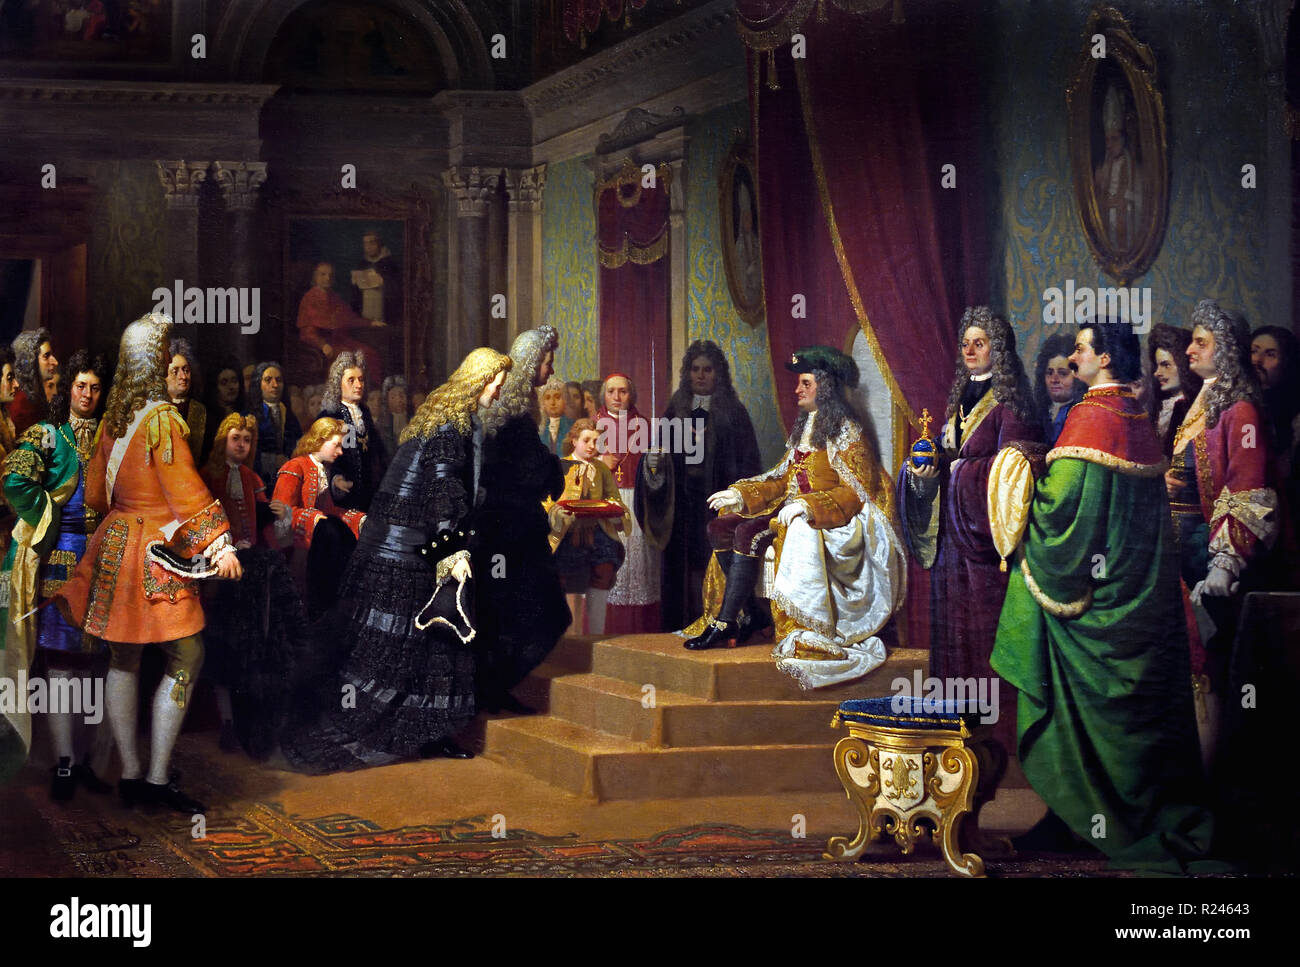 Emperor Charles VI giving an audience to the Venetian ambassadors Pietro Capello and Andrea Corner in Trieste, September 11, 1728, by Francesco Beda (1840-1900). Italy, 19th century Italian ( Charles VI succeeded his elder brother, Joseph I, as Holy Roman Emperor, King of Bohemia, King of Hungary and Croatia, Serbia and Archduke of Austria in 1711.  ) Stock Photo